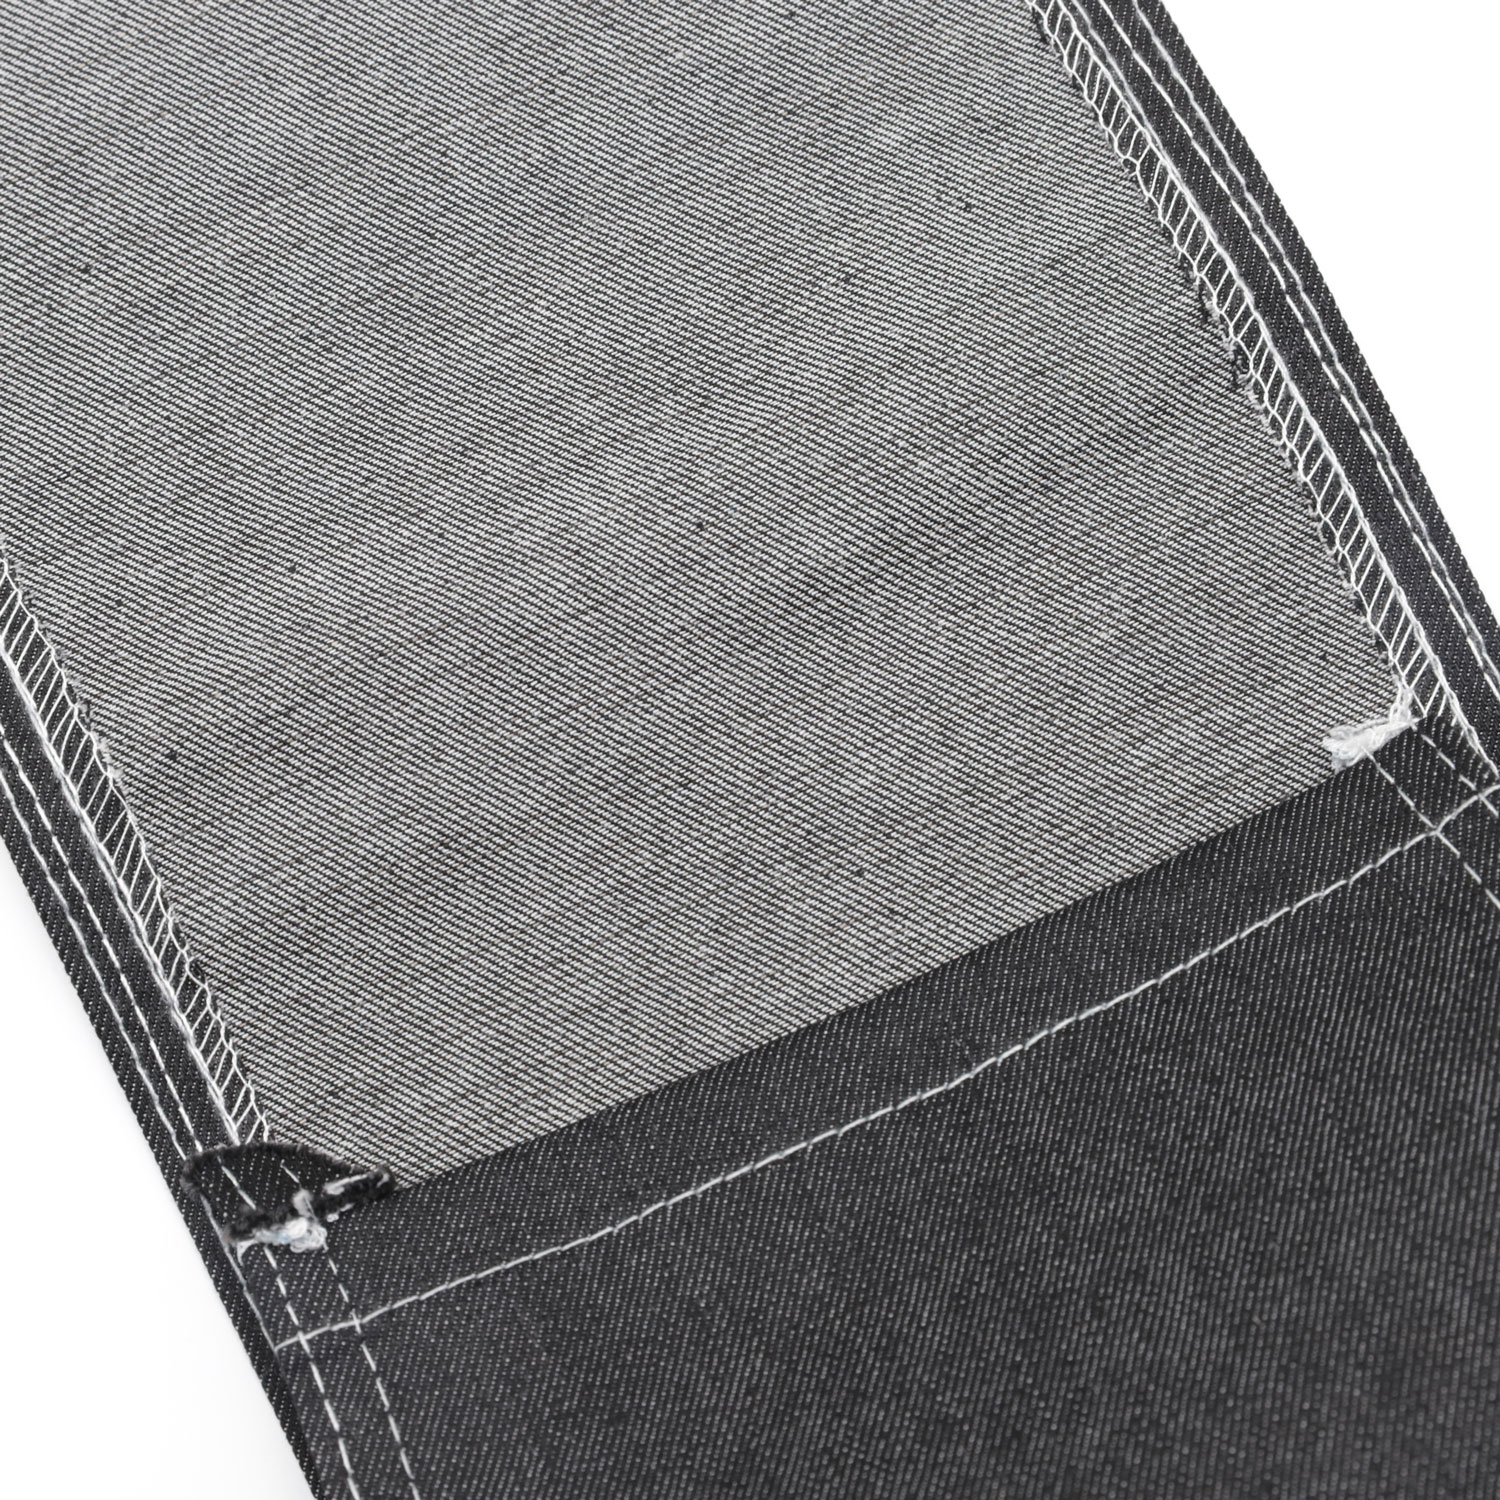 A Look at the World's Best Non-stretch Denim Fabric 1